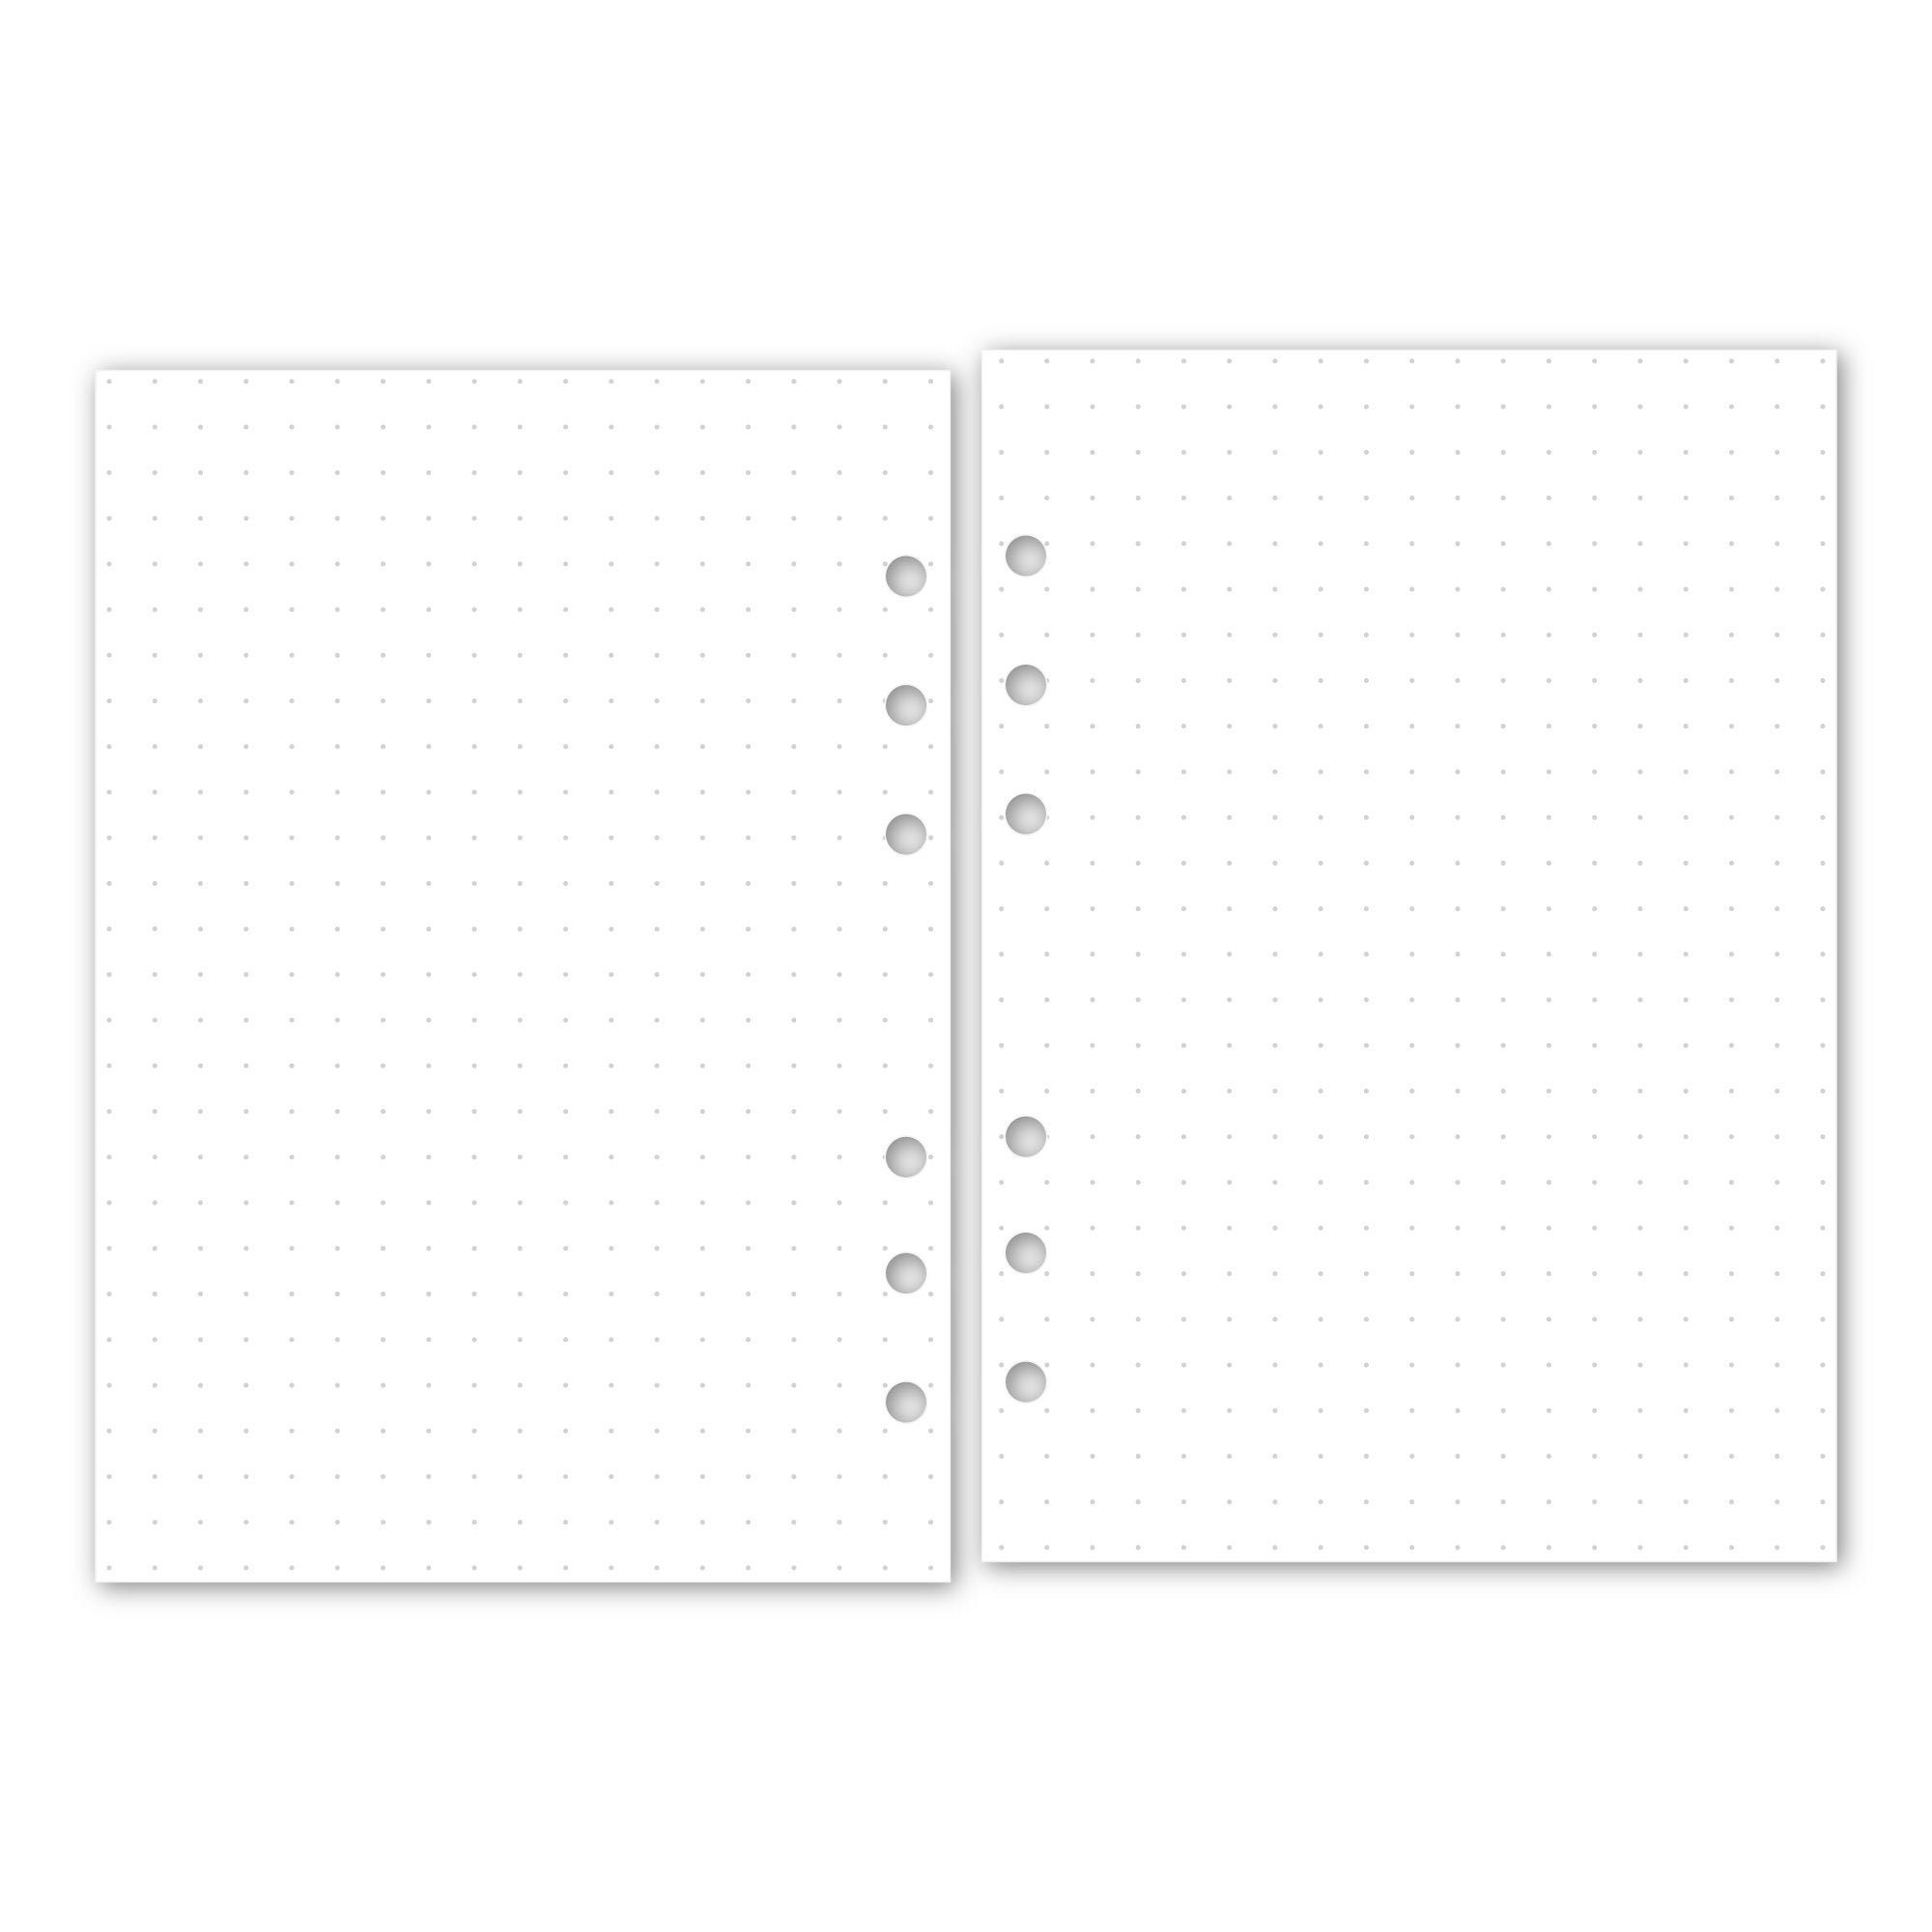 Dotted Journal Kit, Tebik A5 Bullet Grid Journal Loose Leaf with 6 Ring Binder, 240 Pages, 15 Colored Pens, Stencils, Stickers, Tapes for Journal